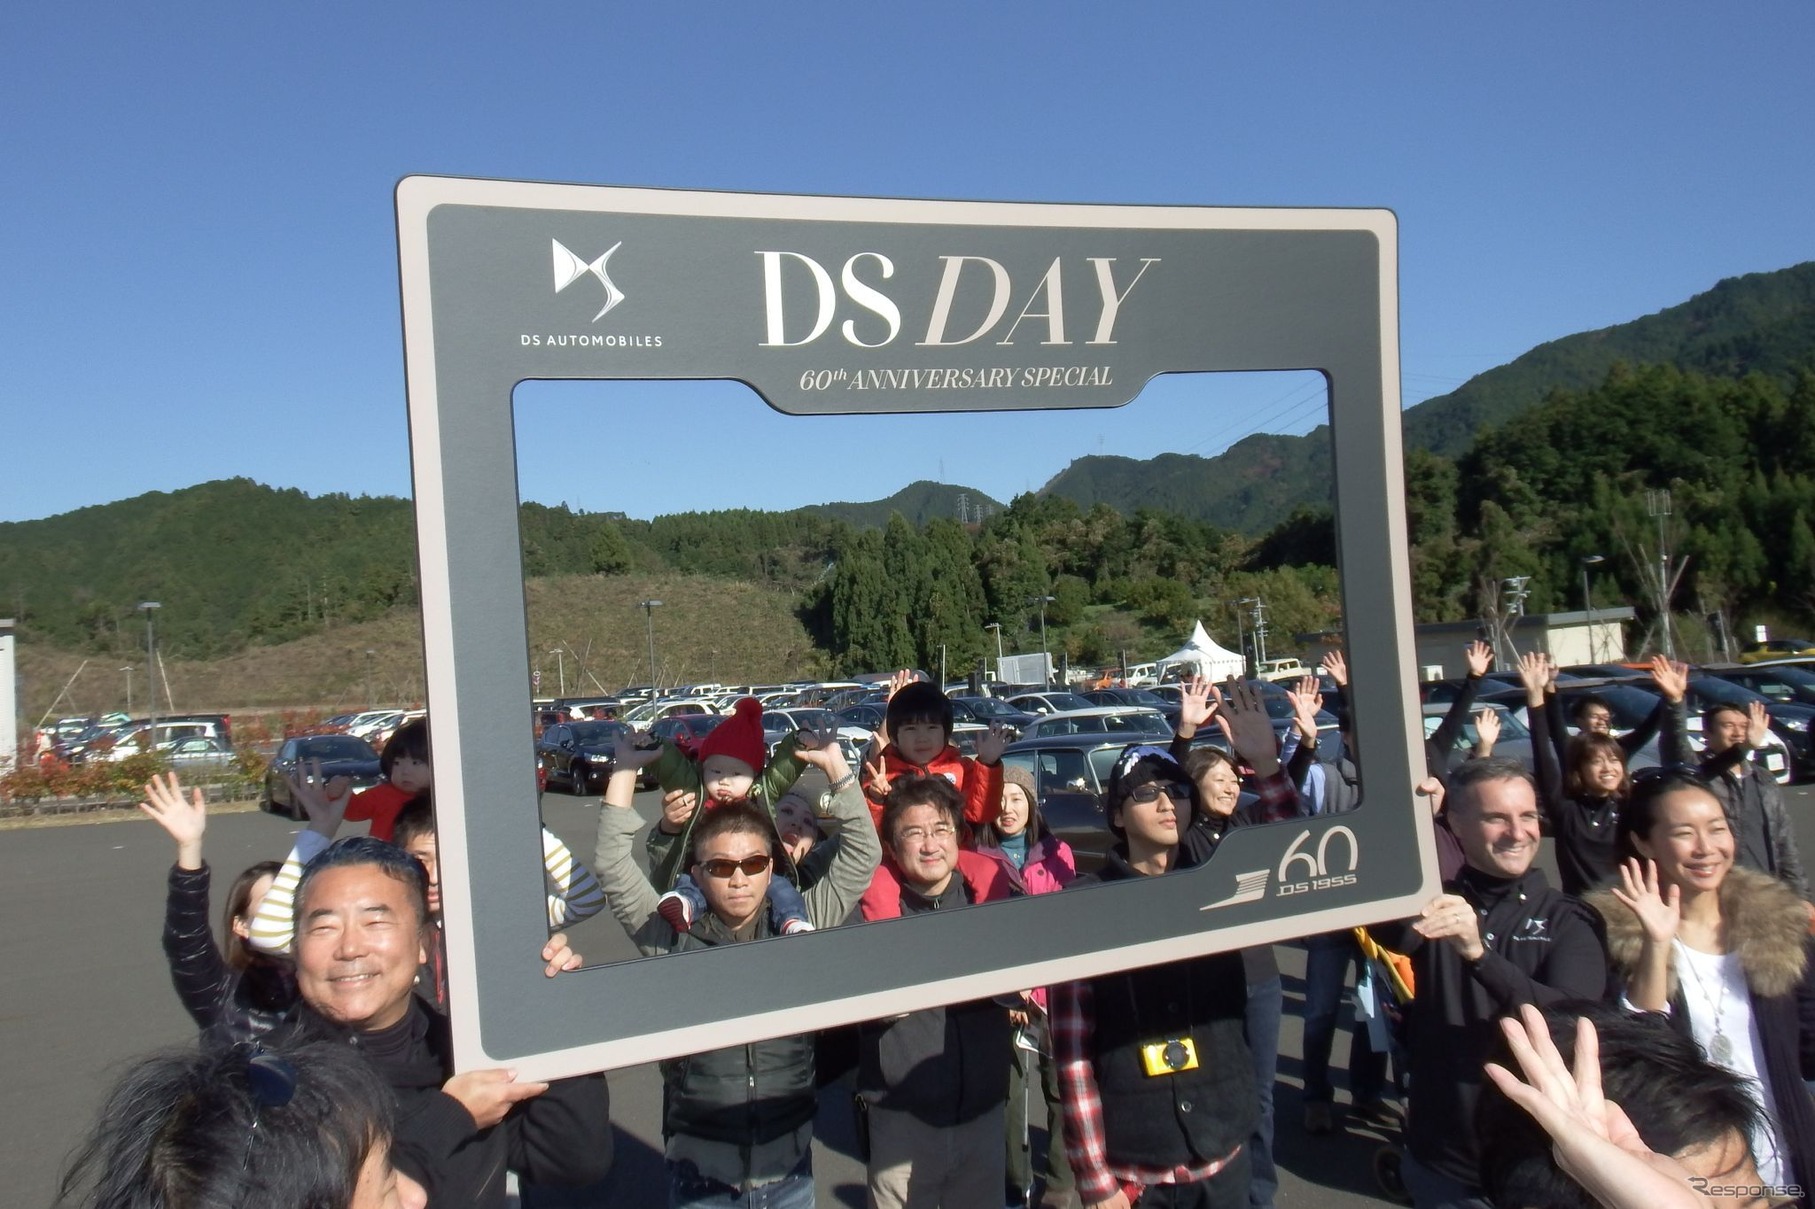 DS DAY 60th Anniversary Special 2015